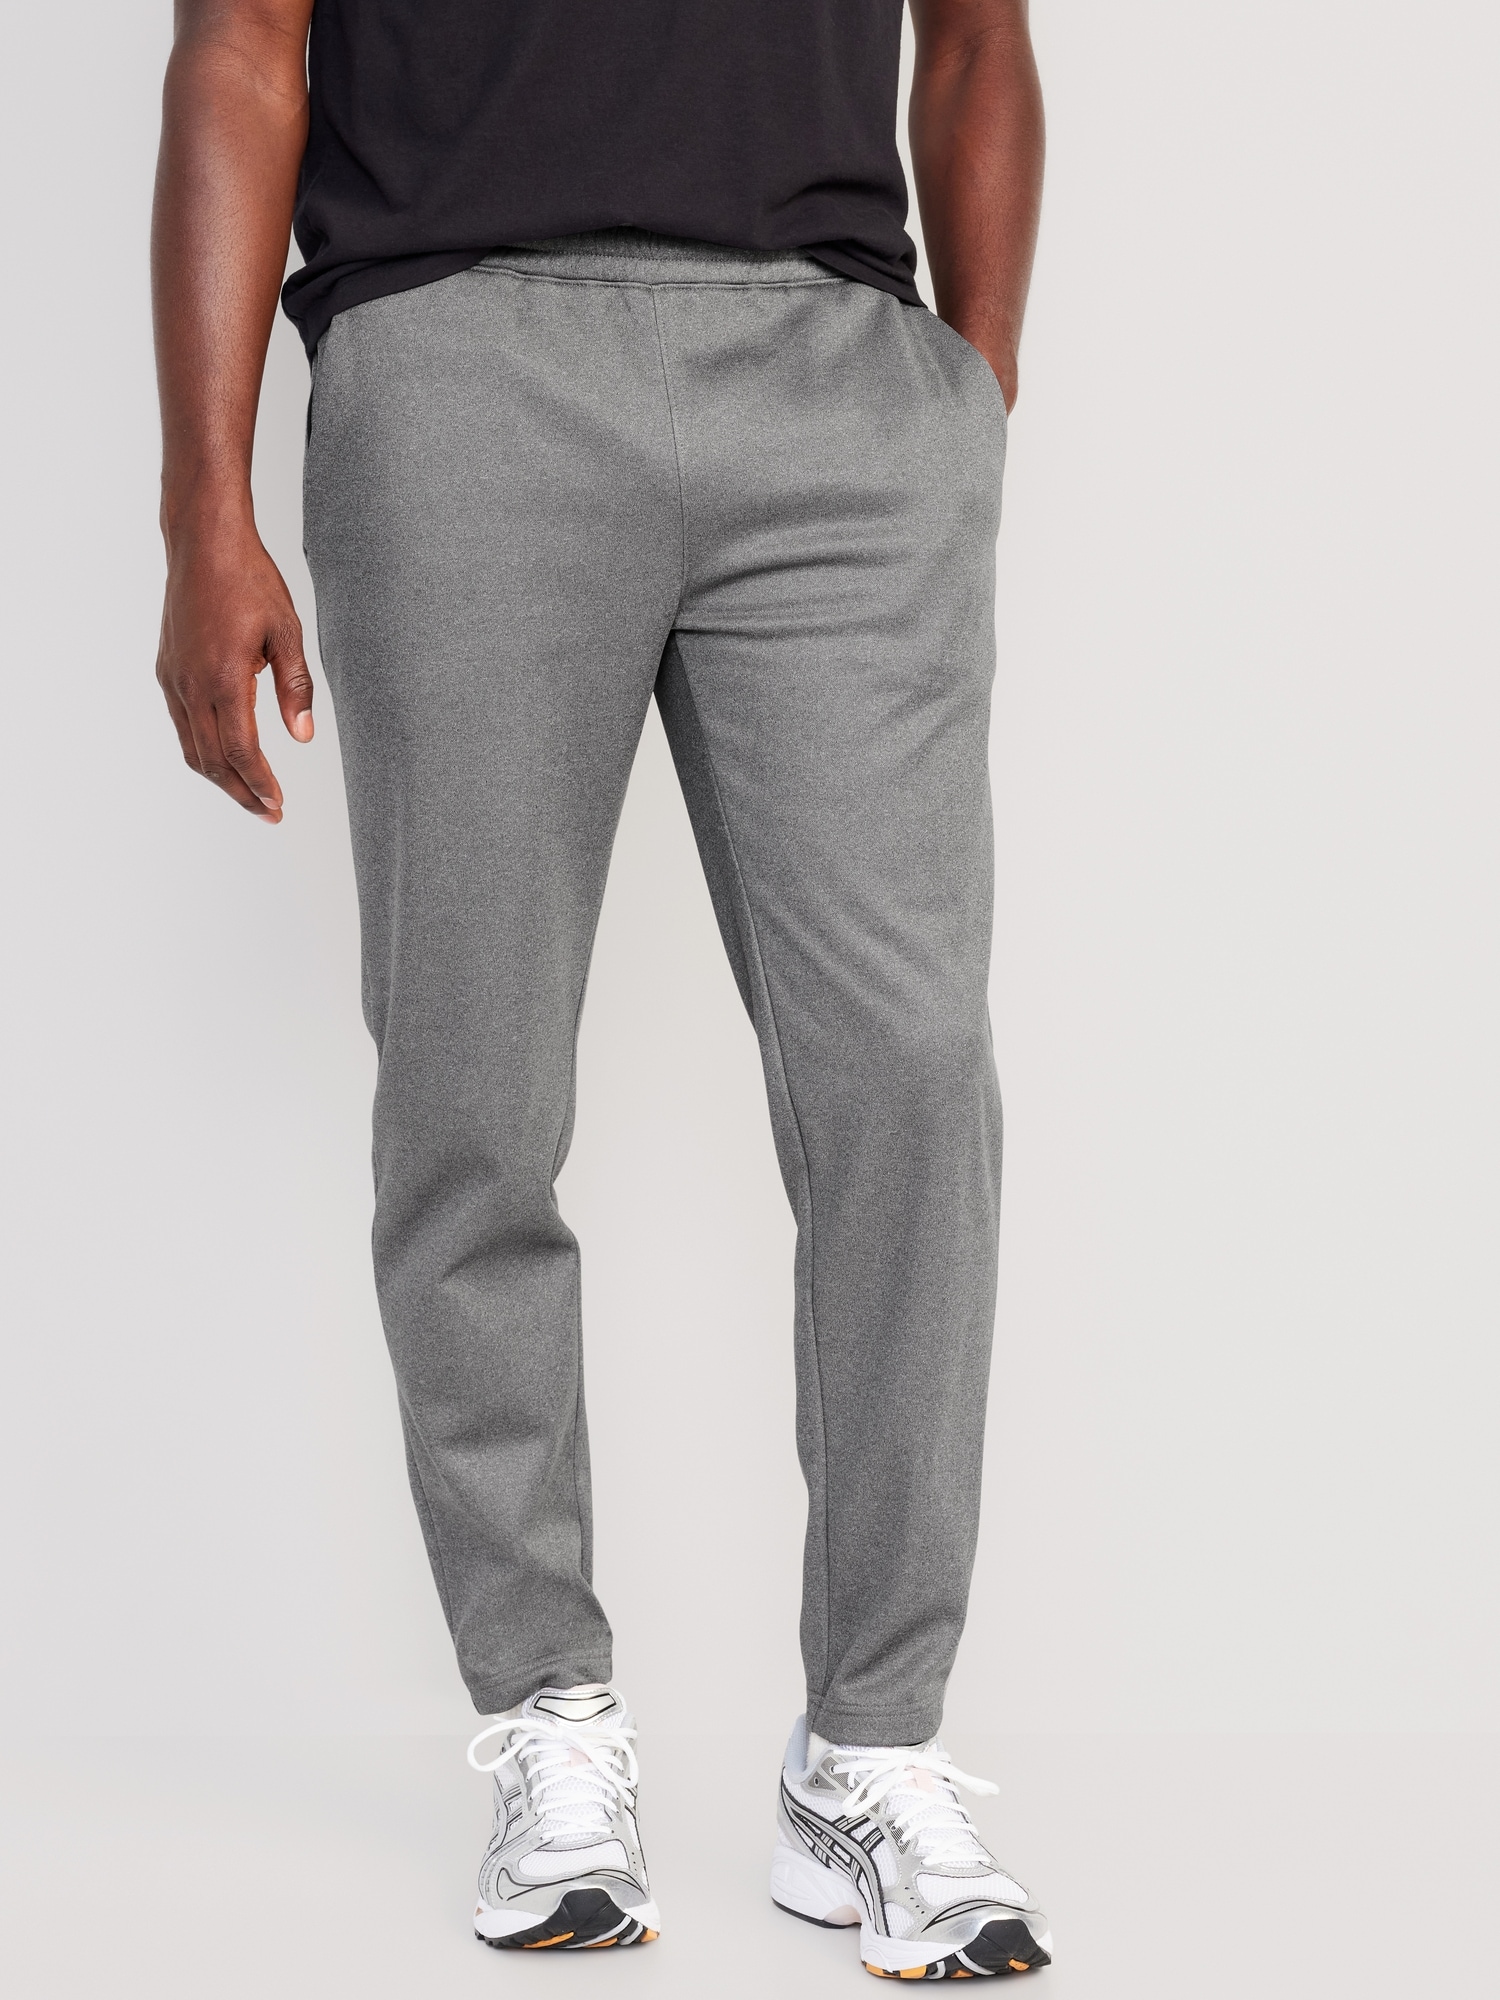 Old Navy CozeCore Tapered Sweatpants for Boys gray - 715046002